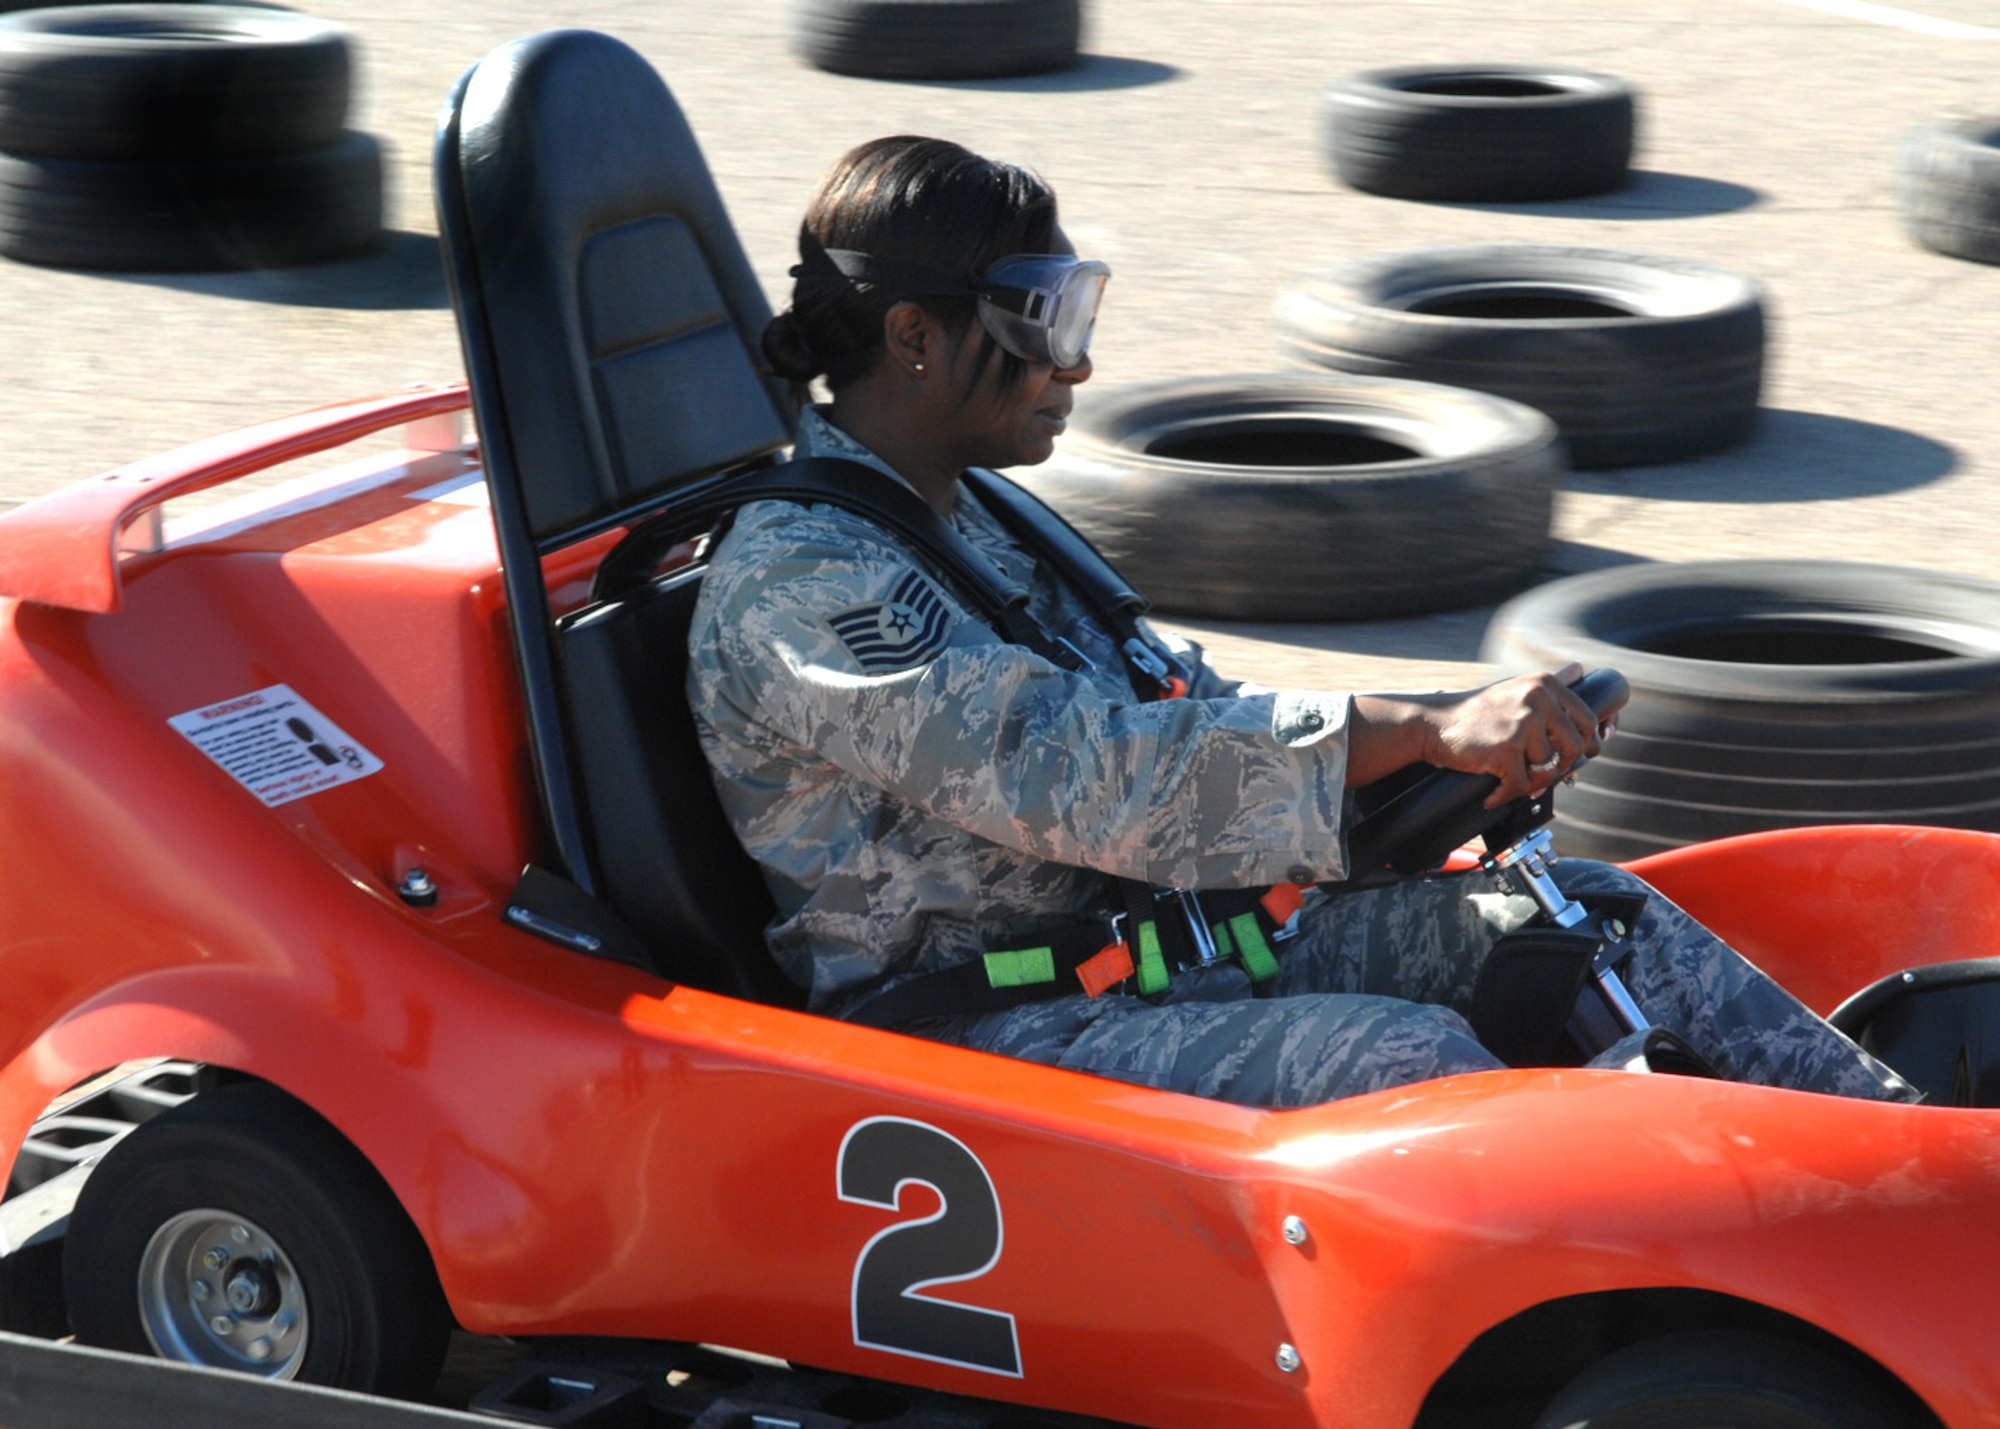 Tech. Sgt. Felicia Hamilton, 49th Fighter Wing, takes a go-kart for a spin while wearing Fatal Vision "Beer" goggles to stimulate driving under the influence at Holloman Air Force Base, N.M., Jan. 5. As part of Safety Day, Airmen got a chance to experience how driving could be after drinking. (U.S. Air Force photo/Airman 1st Class Veronica Salgado)